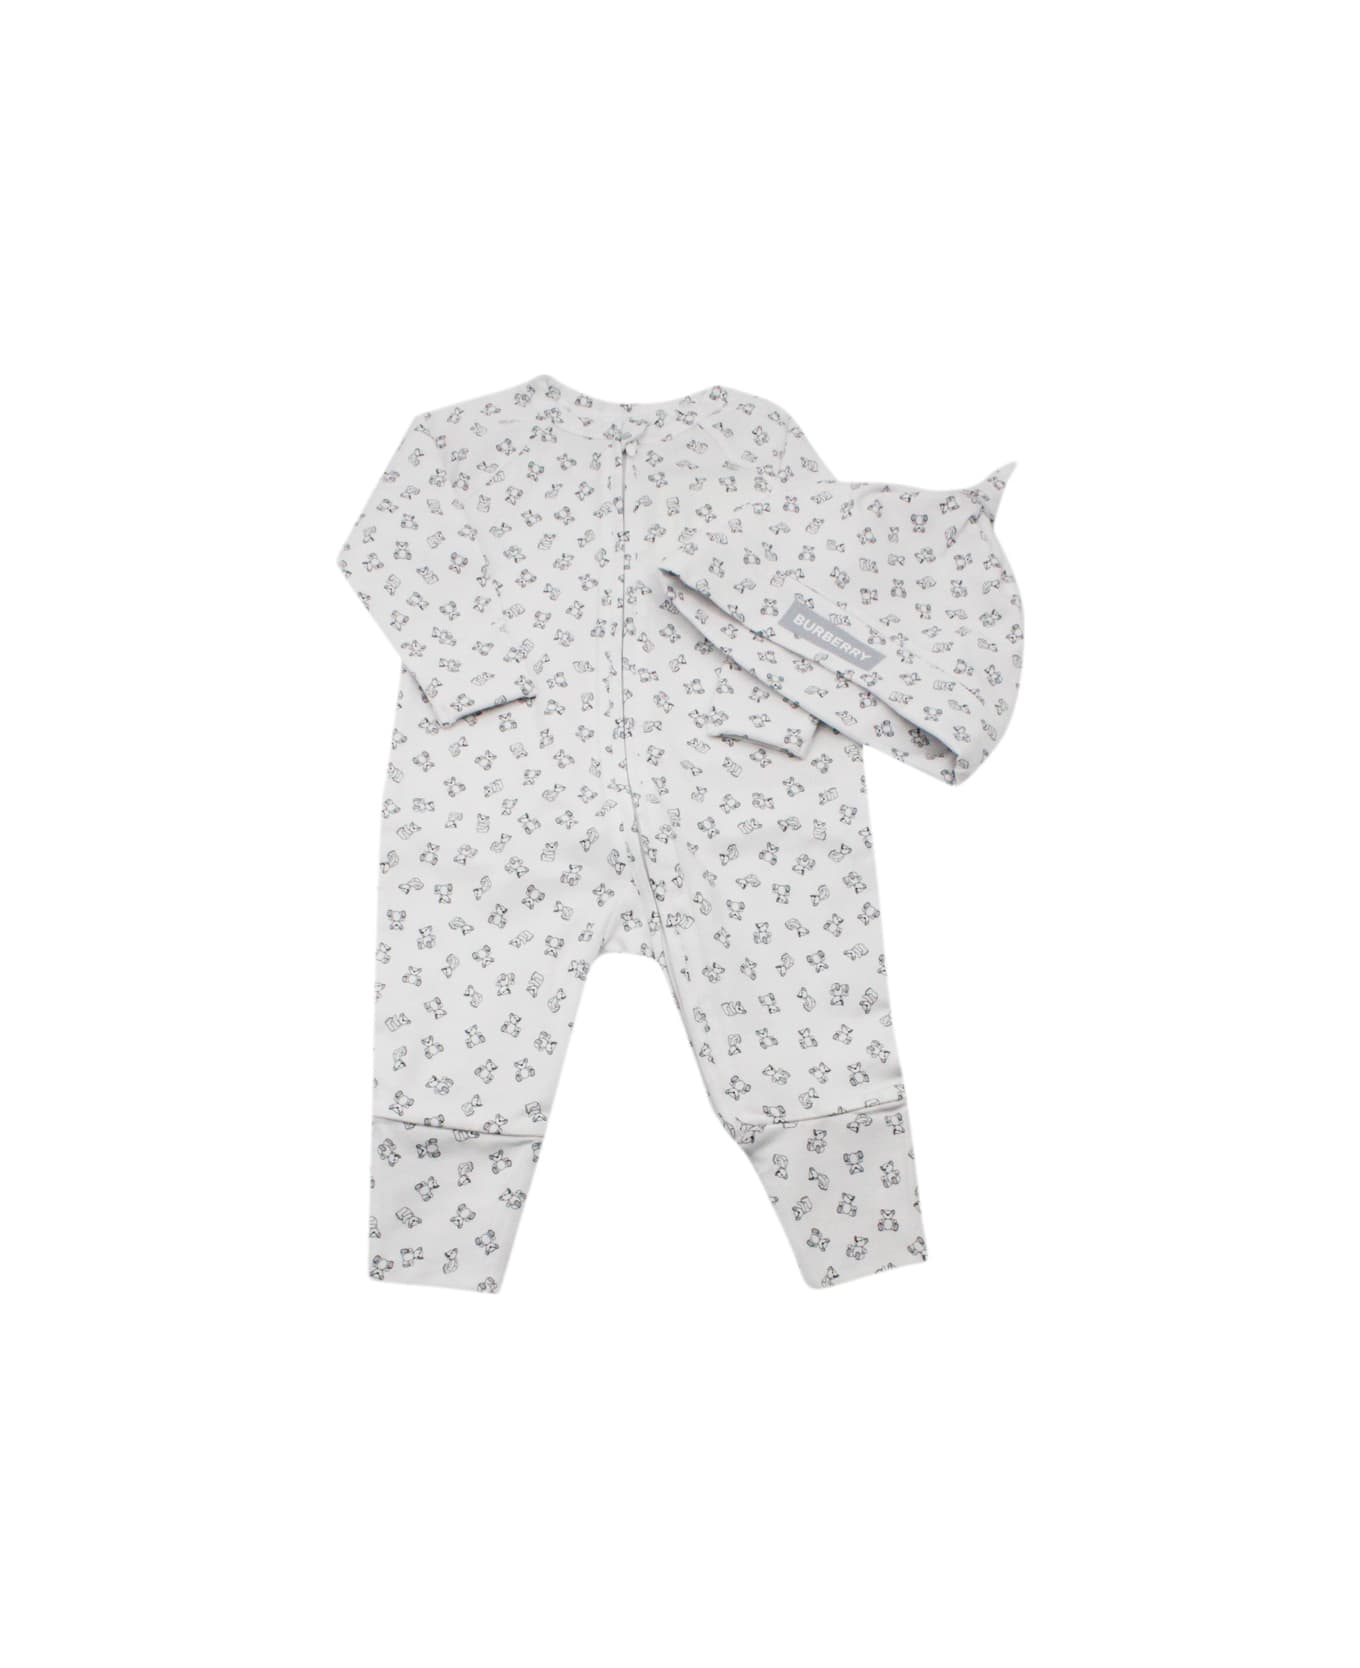 Burberry Blue Complete Gift Set Consisting Of Onesie + Cotton Cap With Thomas Teddy Bear Print - White